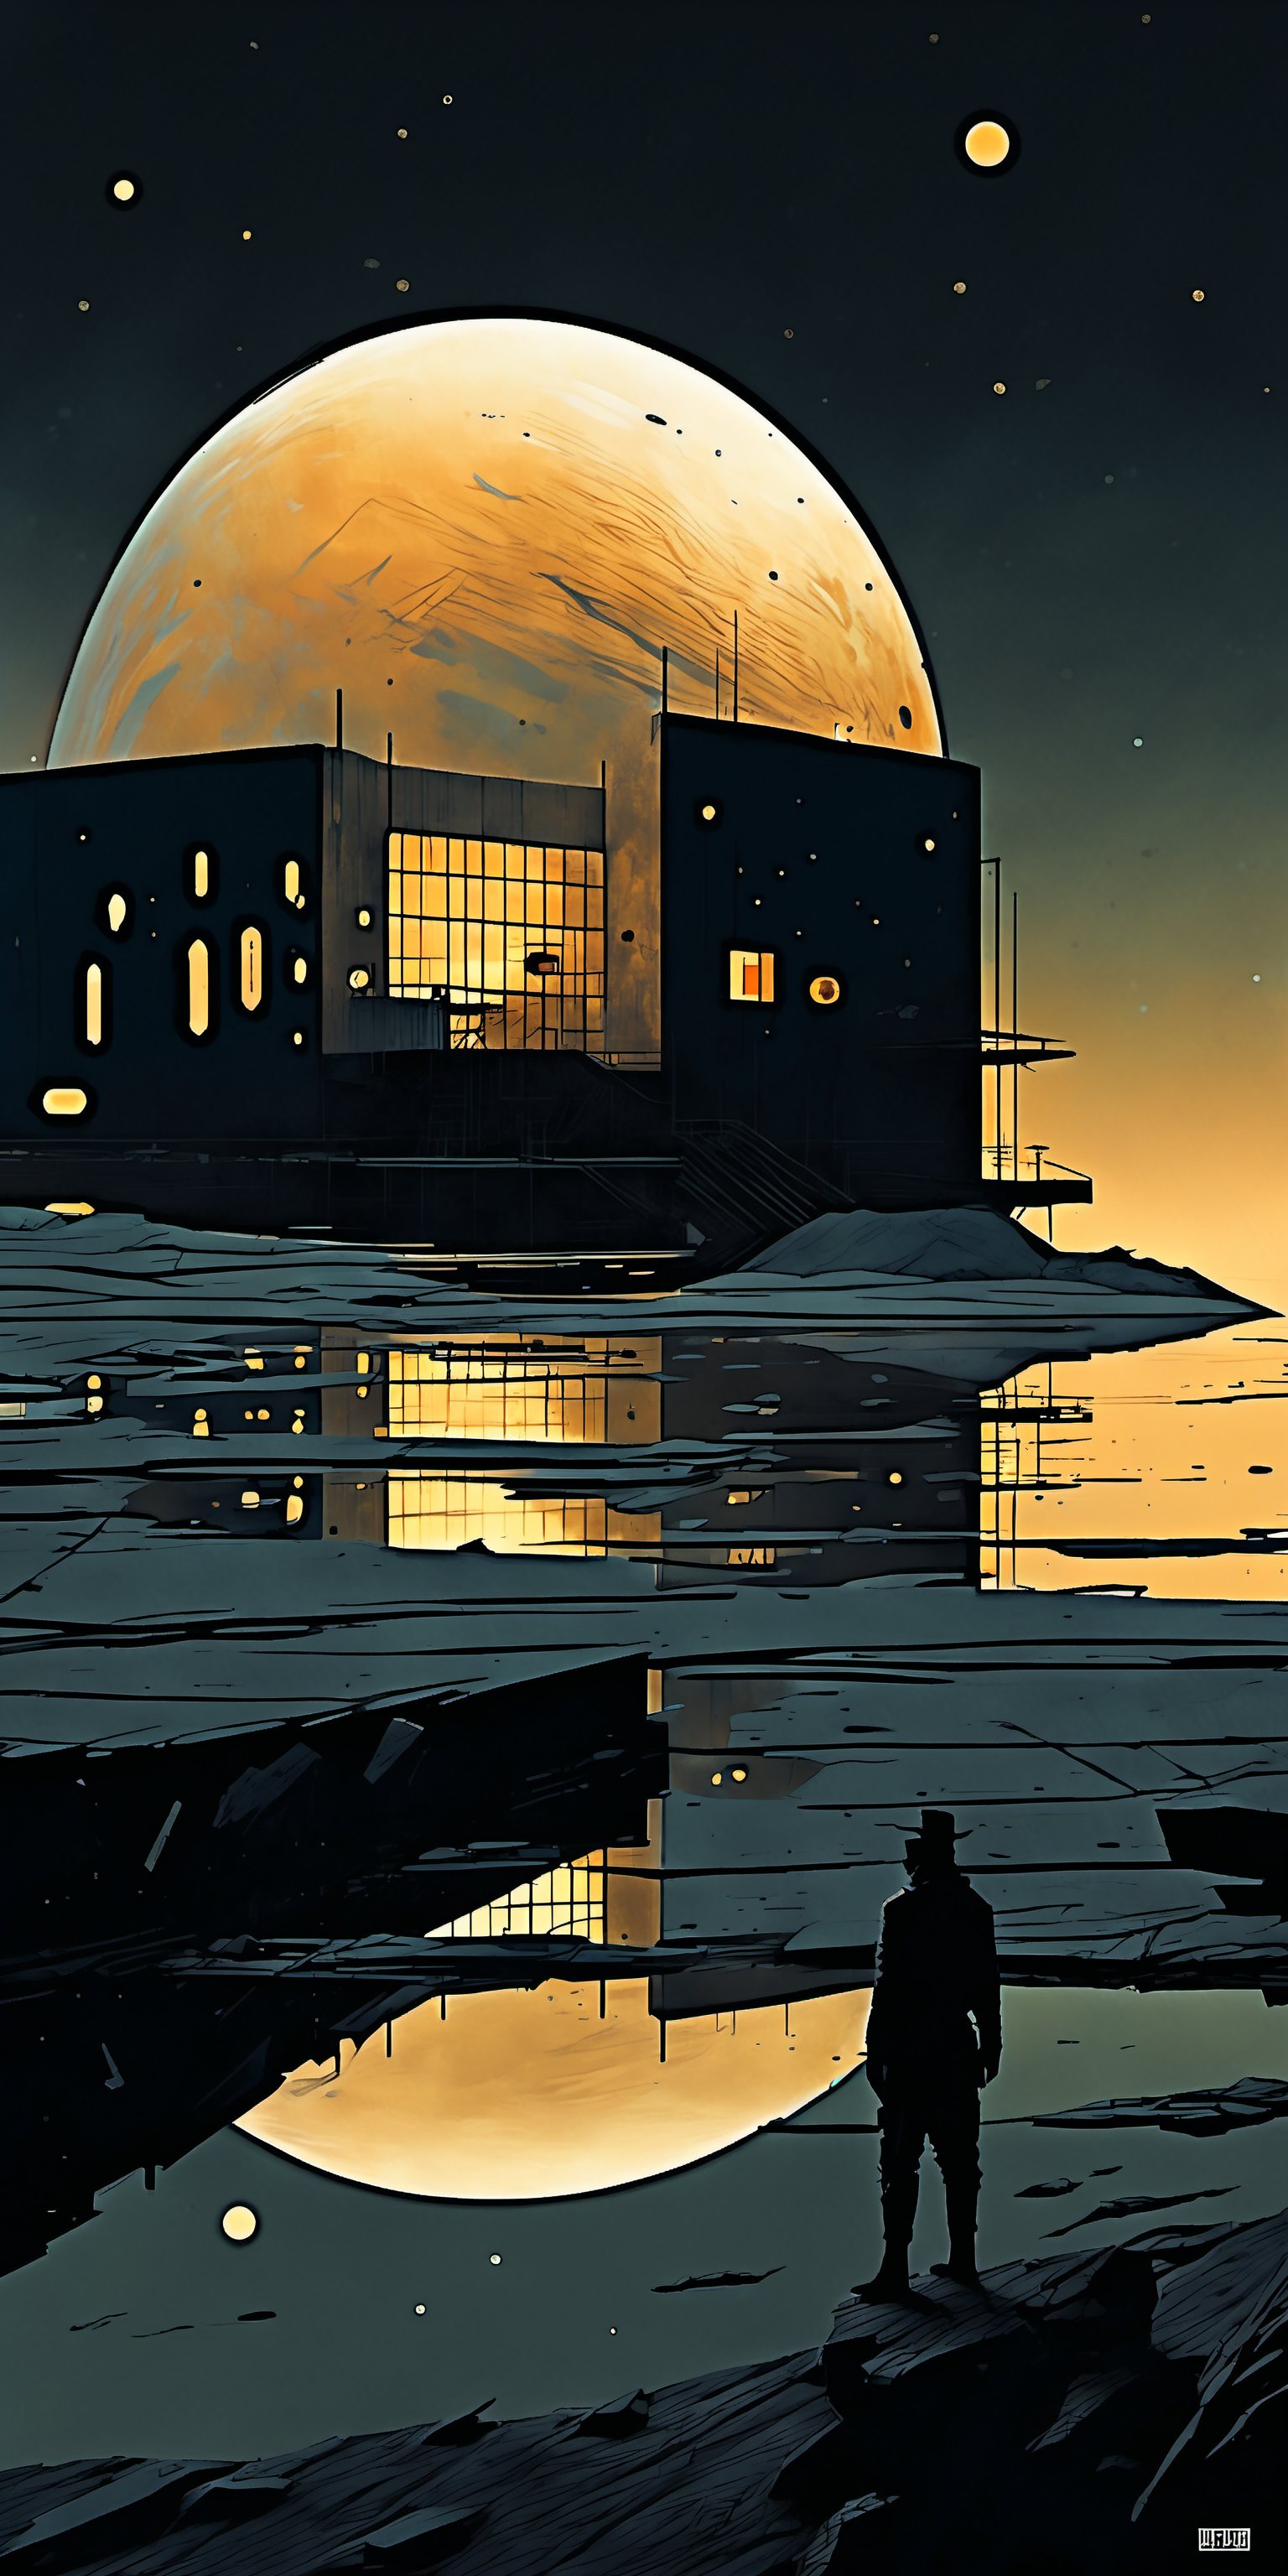 "The scene is set at nighttime, with eerie, muted golden hues from distant stars casting an unsettling glow over the architecture, creating a surreal and dystopian atmosphere. Depict a vast, expansive space scene with an ominous scale against a grand, immersive outer space background. Feature a massive structure that maintains simplified forms and geometric shapes, yet exudes an unsettling, otherworldly quality. Emphasize clean lines and smooth surfaces, but with a stark, almost sterile aesthetic. A restrained color palette with neutral tones and minimal accents creates a cold, cohesive look. Unnecessary embellishments are removed, focusing on a stark functionality and clarity. Increased negative space provides a sense of emptiness and desolation. High-quality, unnatural materials with simple finishes add an eerie elegance. Proportion and balance ensure a disturbing harmony, while subtle, alien textures and details add an uncanny depth without overwhelming the design's stark simplicity."